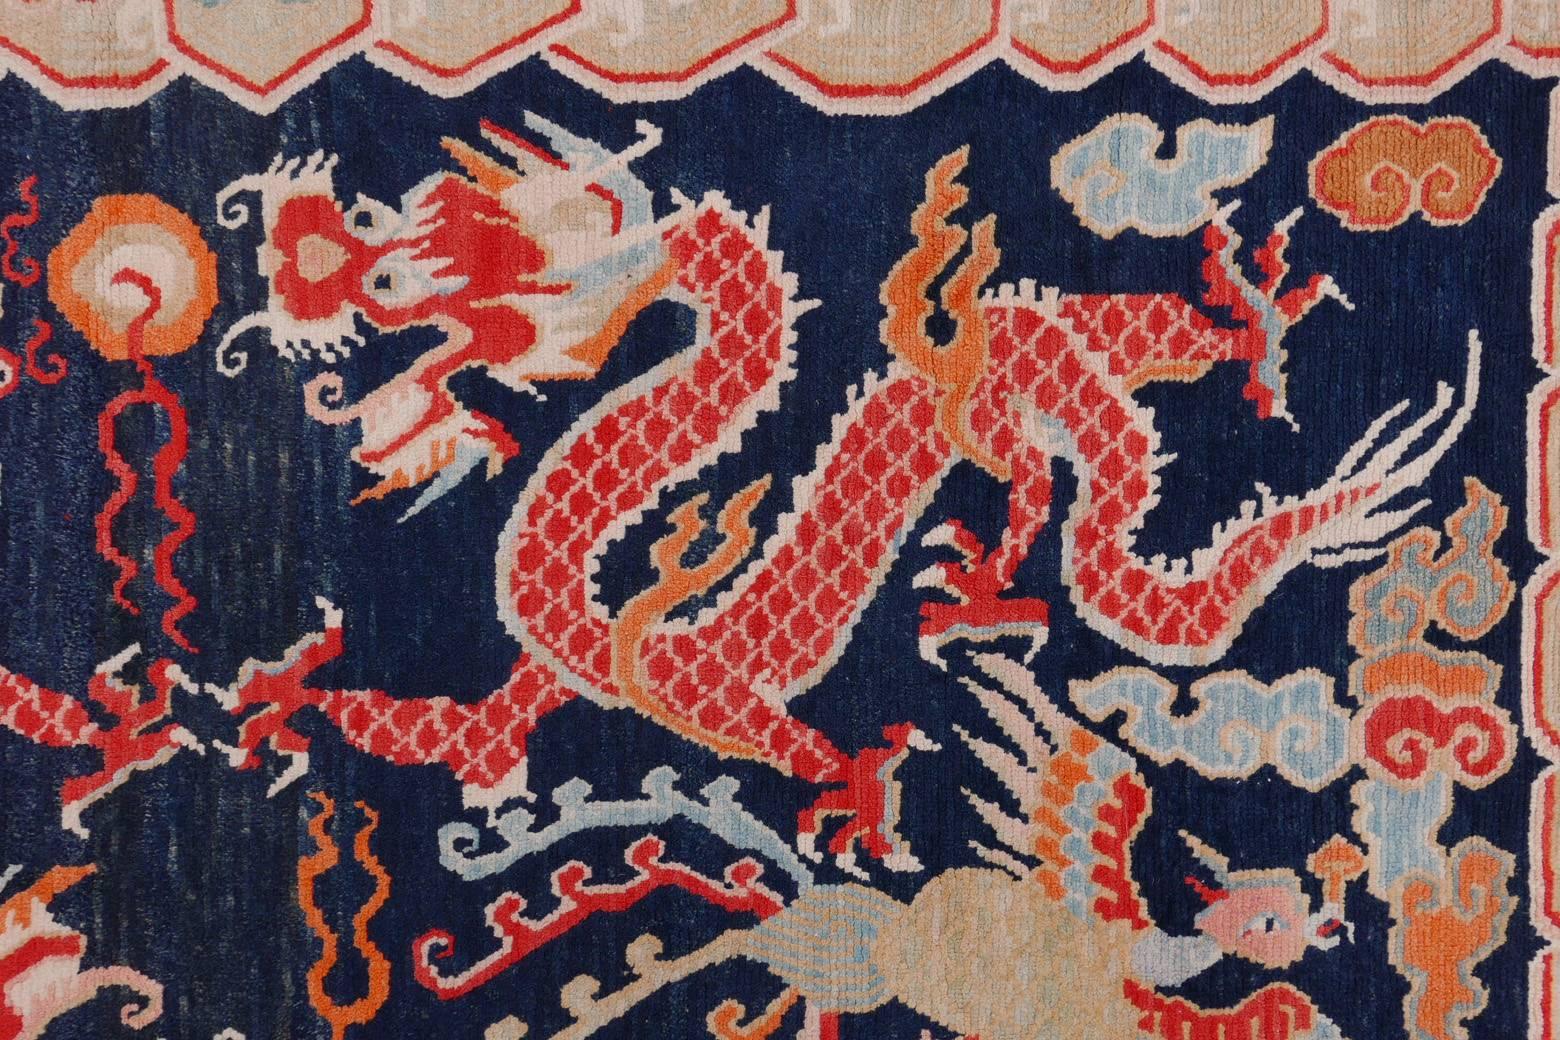 Provenance: Purchased from Theresa Coleman's Tibetan Gallery in the early 2000s.
This stunning all-natural dye Tibetan Khaden depicts two dragons playing with the pearl of wisdom and two phoenixes.
The dragons bodies are elegantly shaped with scales